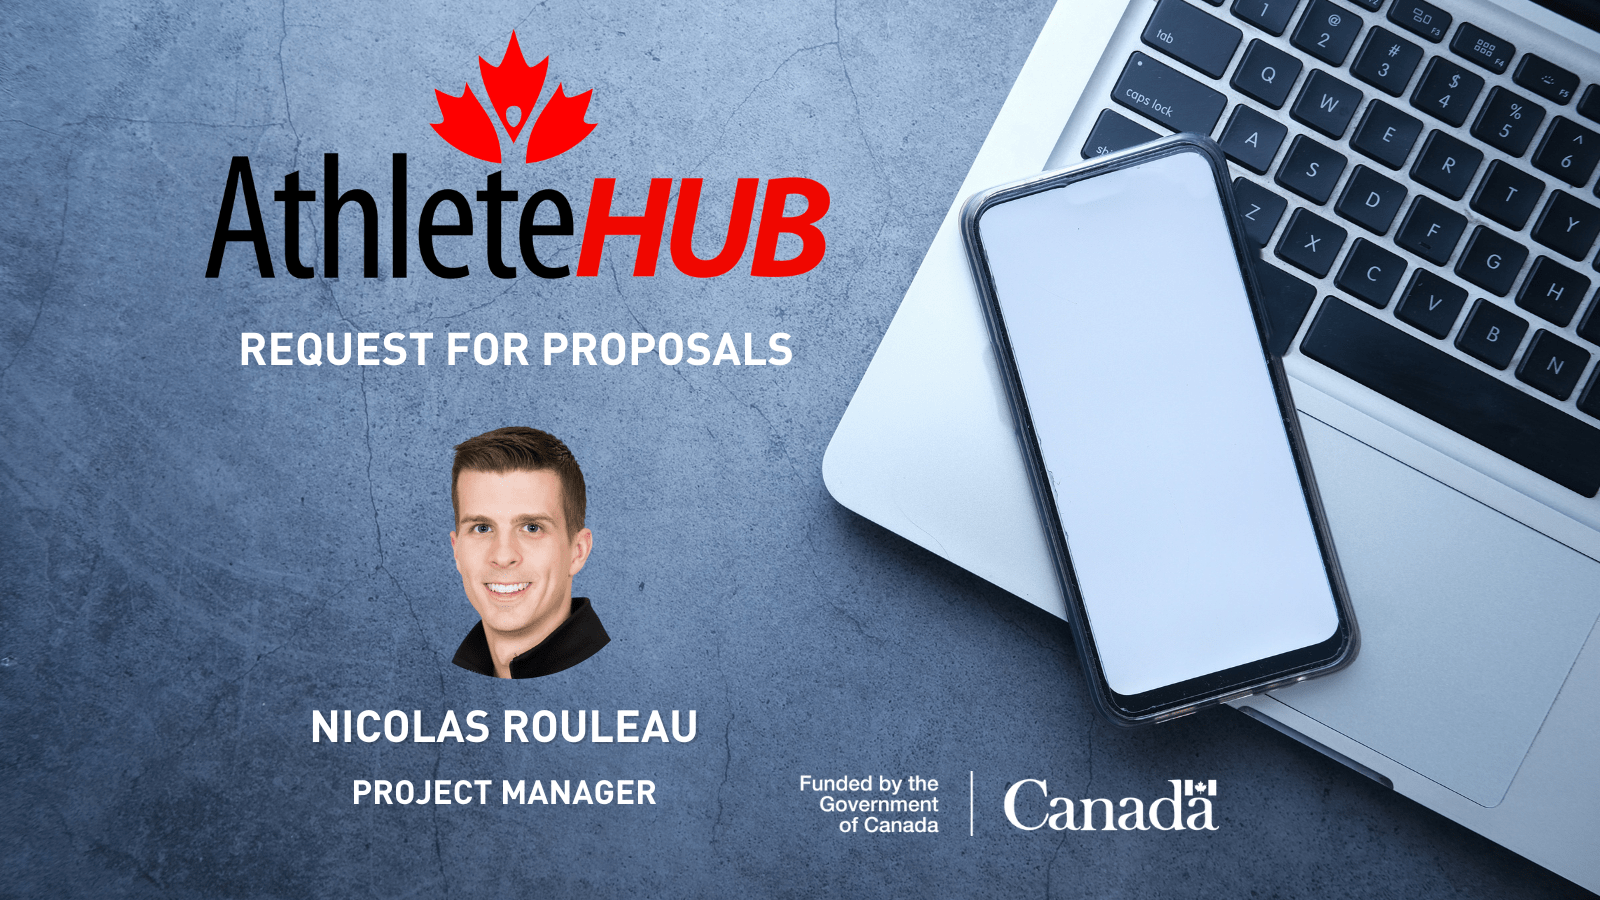 AthletesCAN launches Request for Proposals, welcomes Nicolas Rouleau as Project Manager for AthleteHUB Initiative